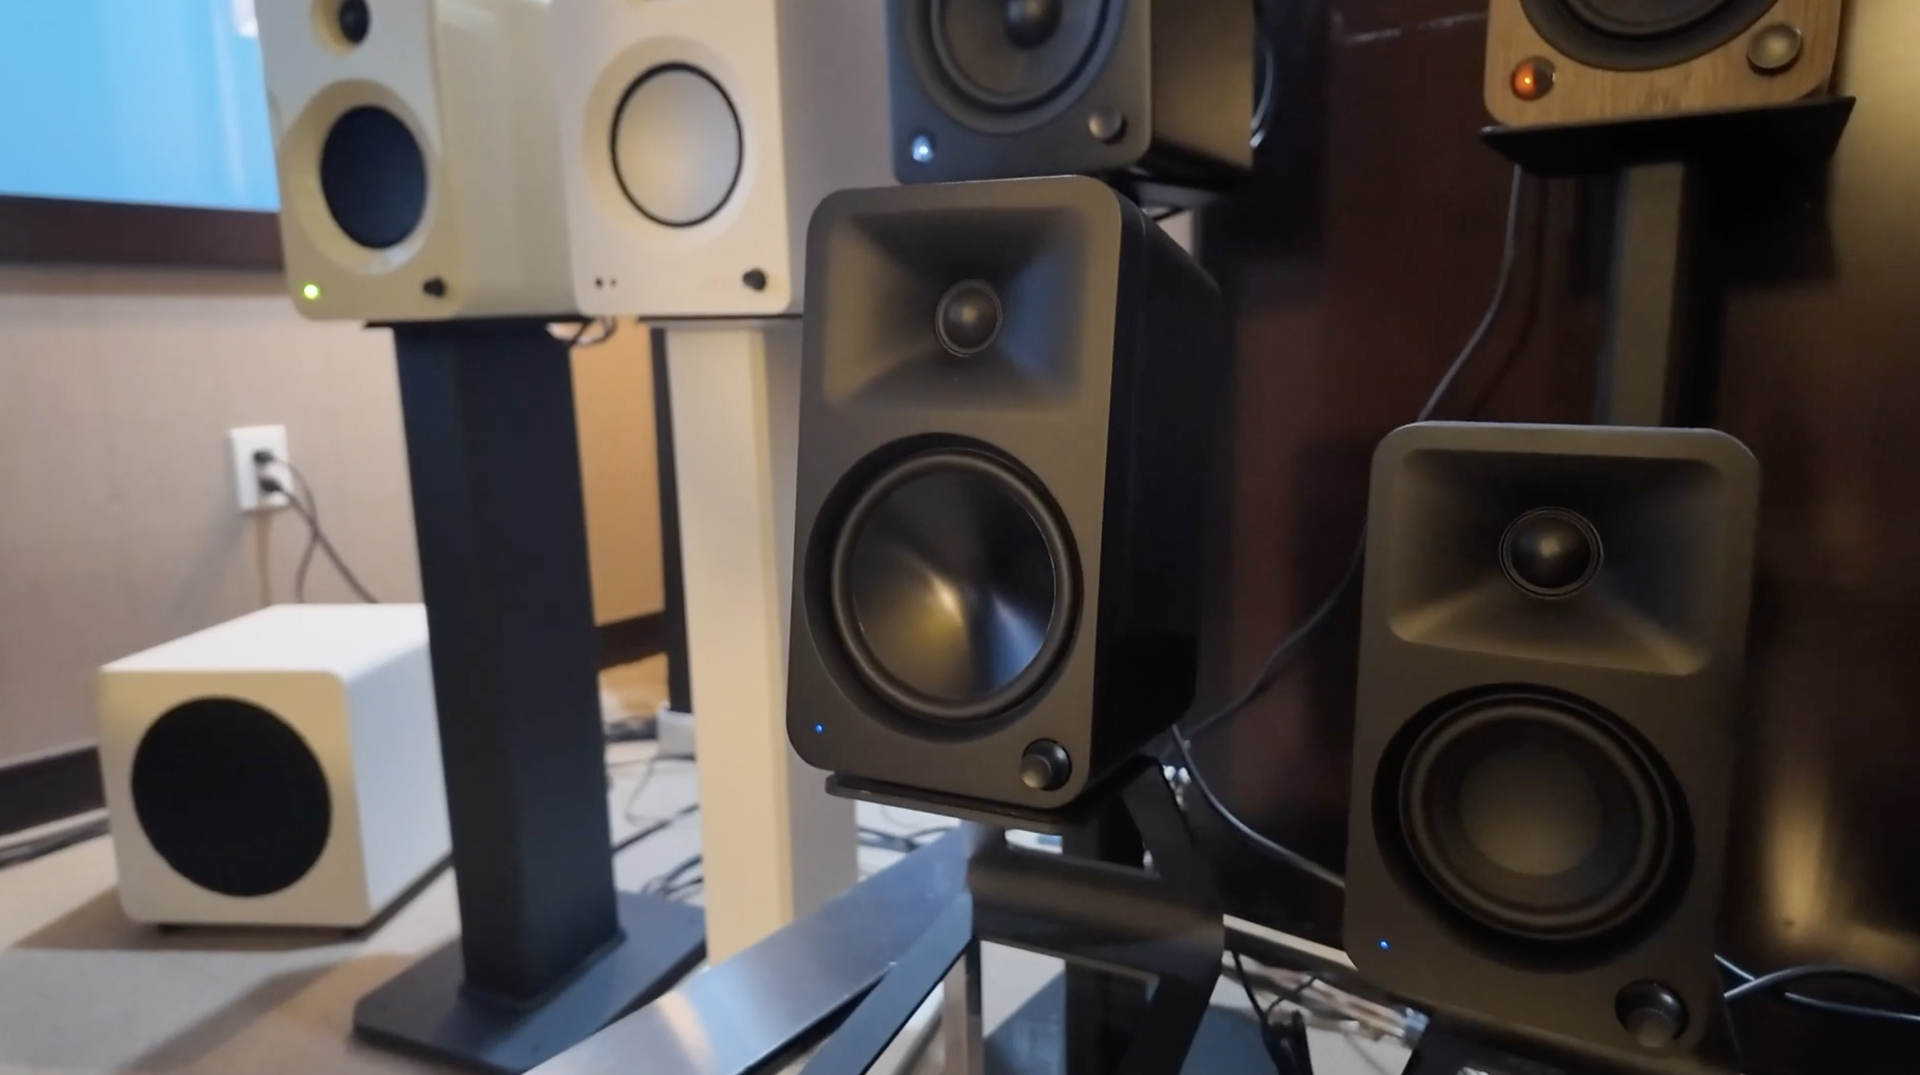 Kanto’s ORA4 desktop speakers just went straight to the top of our CES